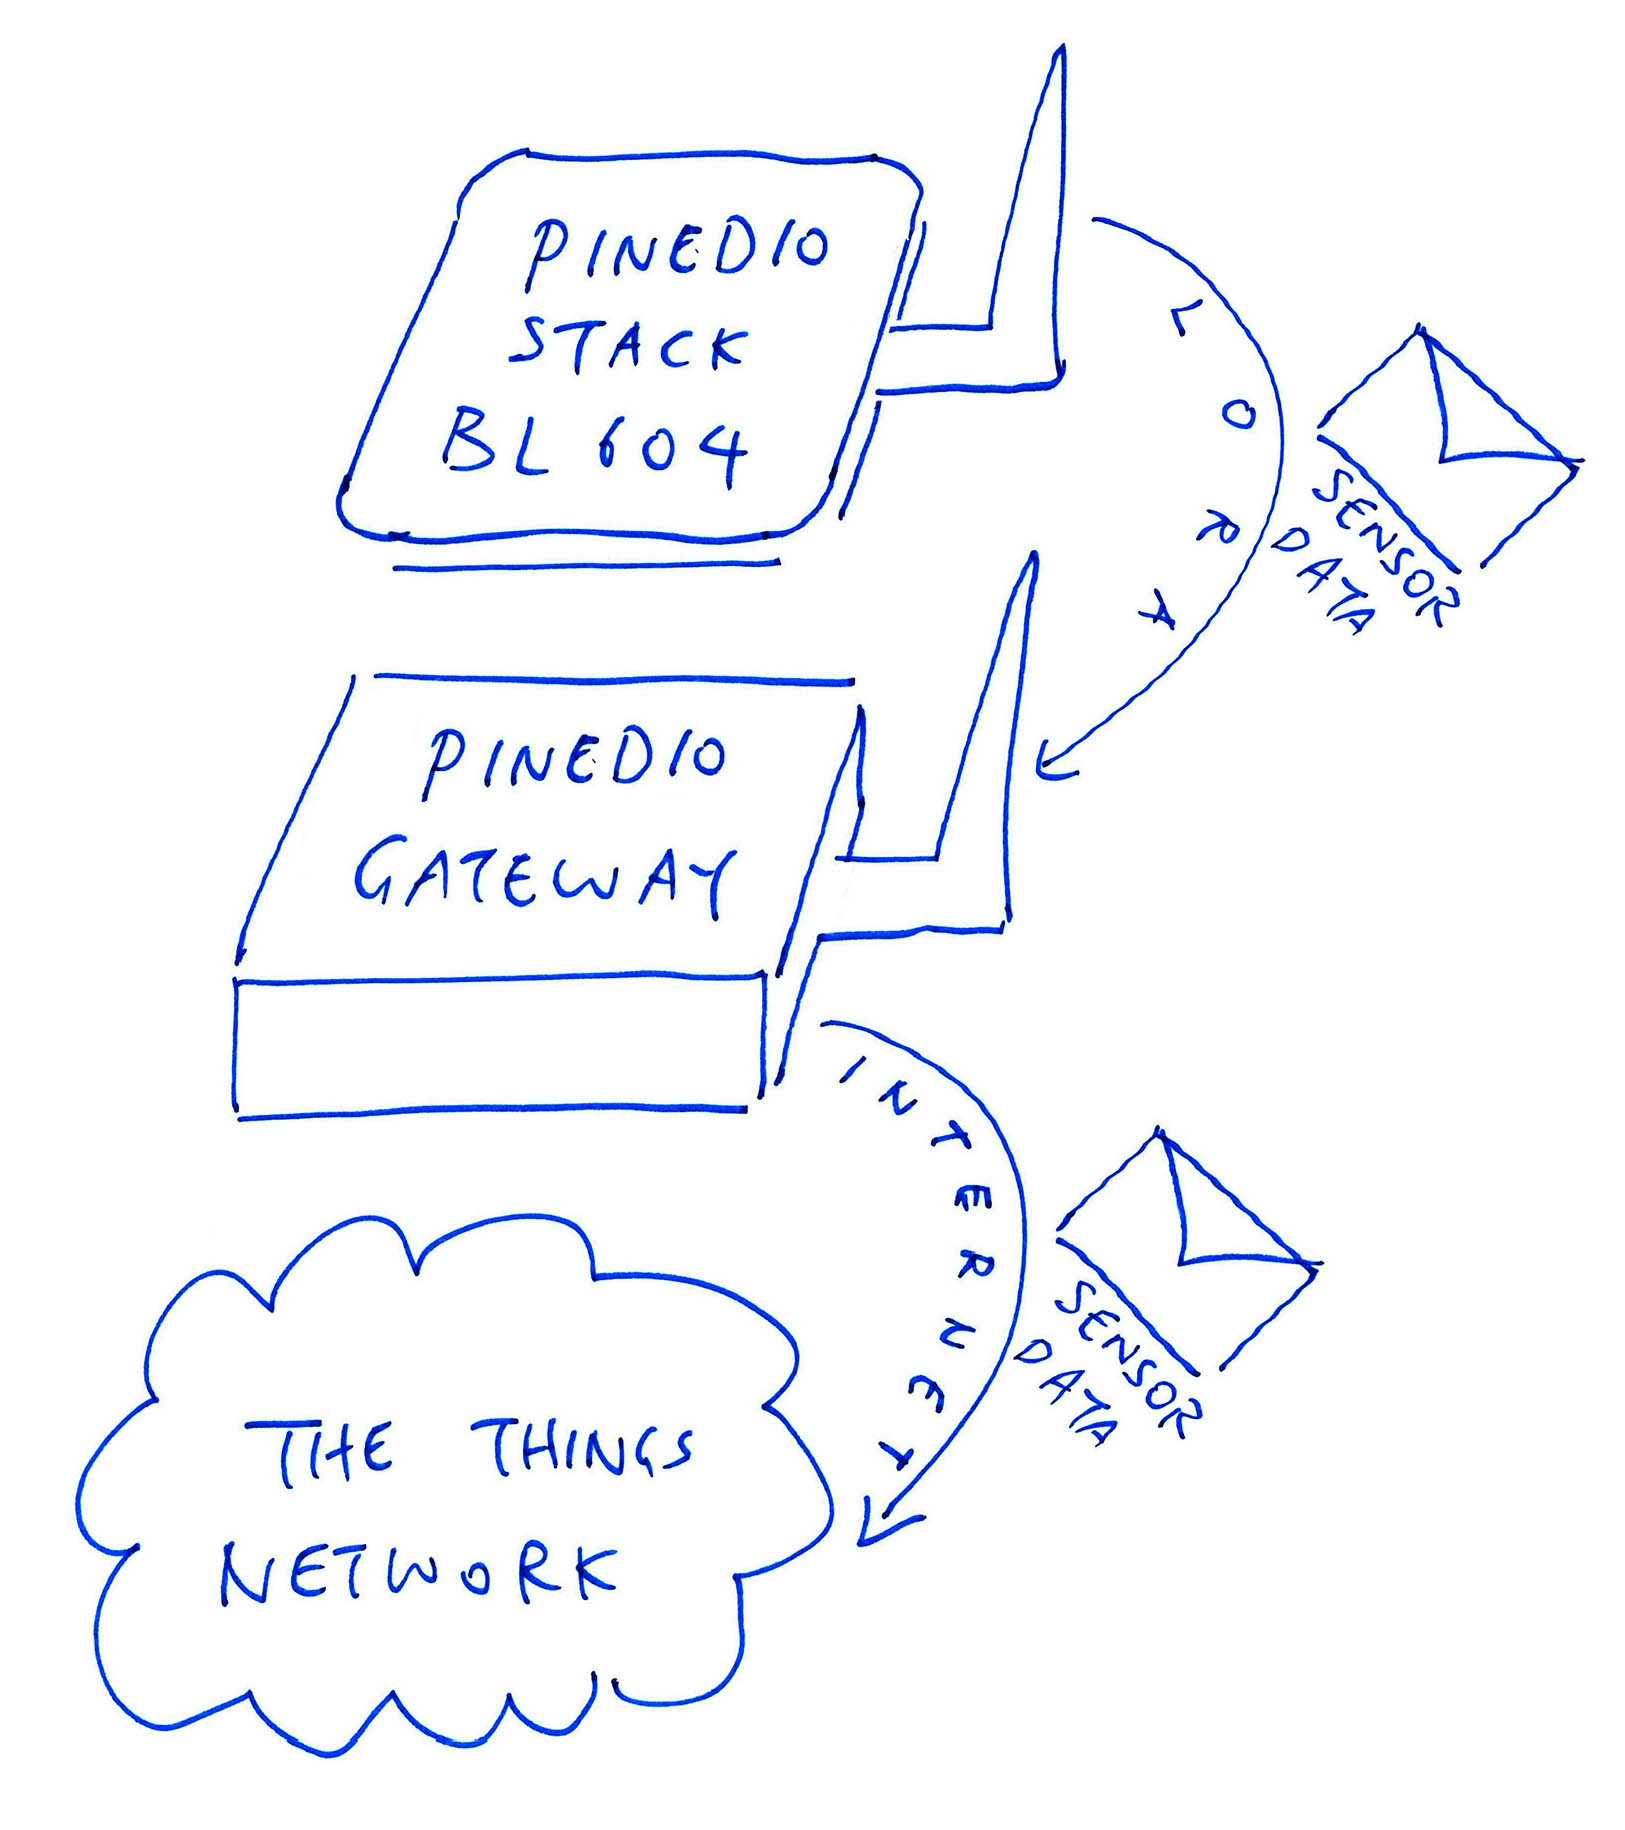 PineDio Gateway relays LoRa Packets to The Things Network